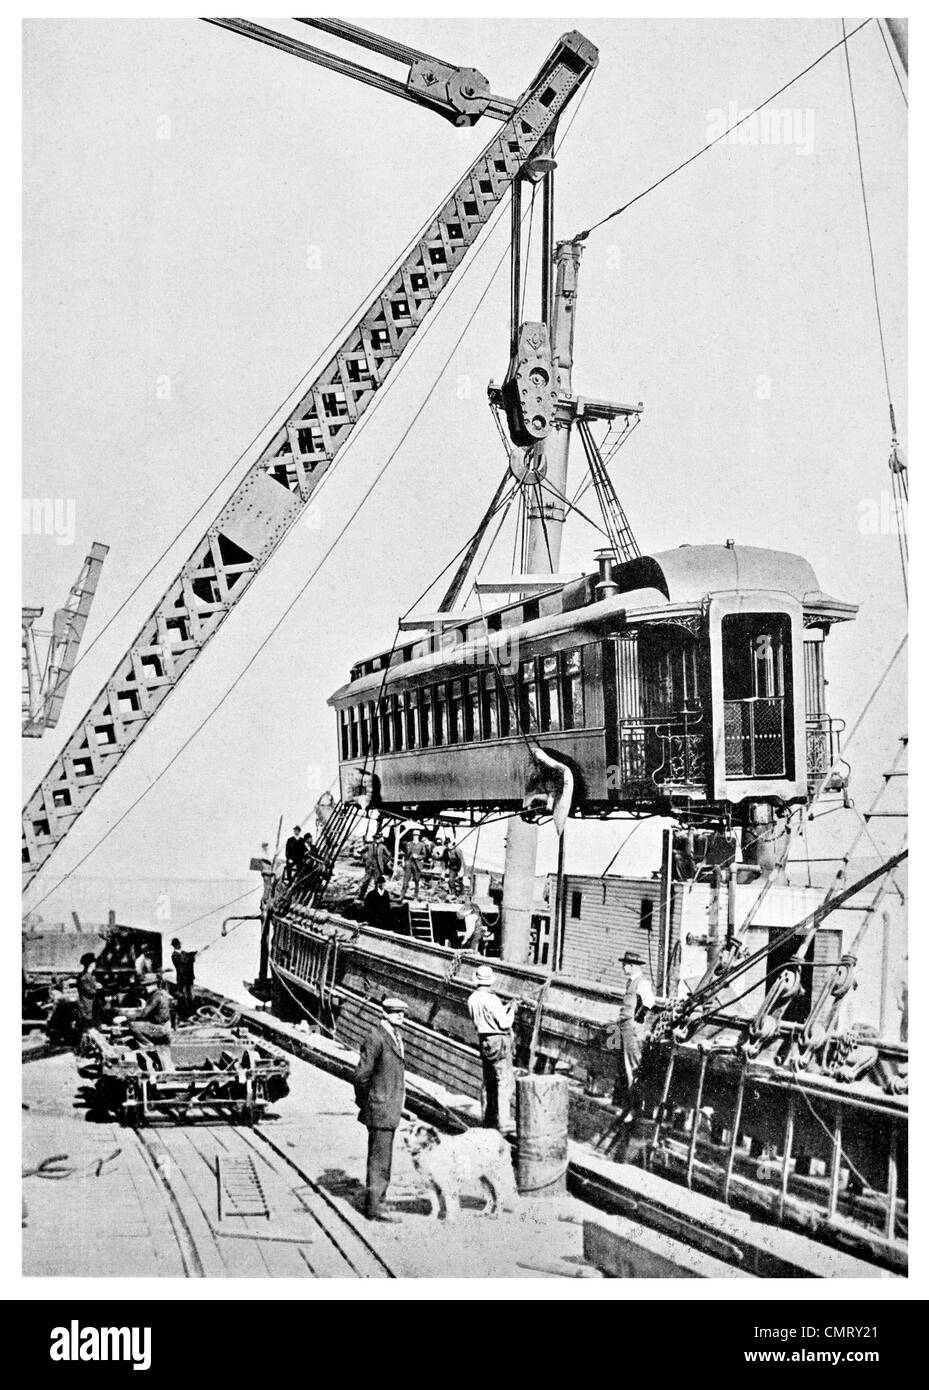 1923 Loading a passenger carriage at Seattle for shipment to Alaska railway train Stock Photo